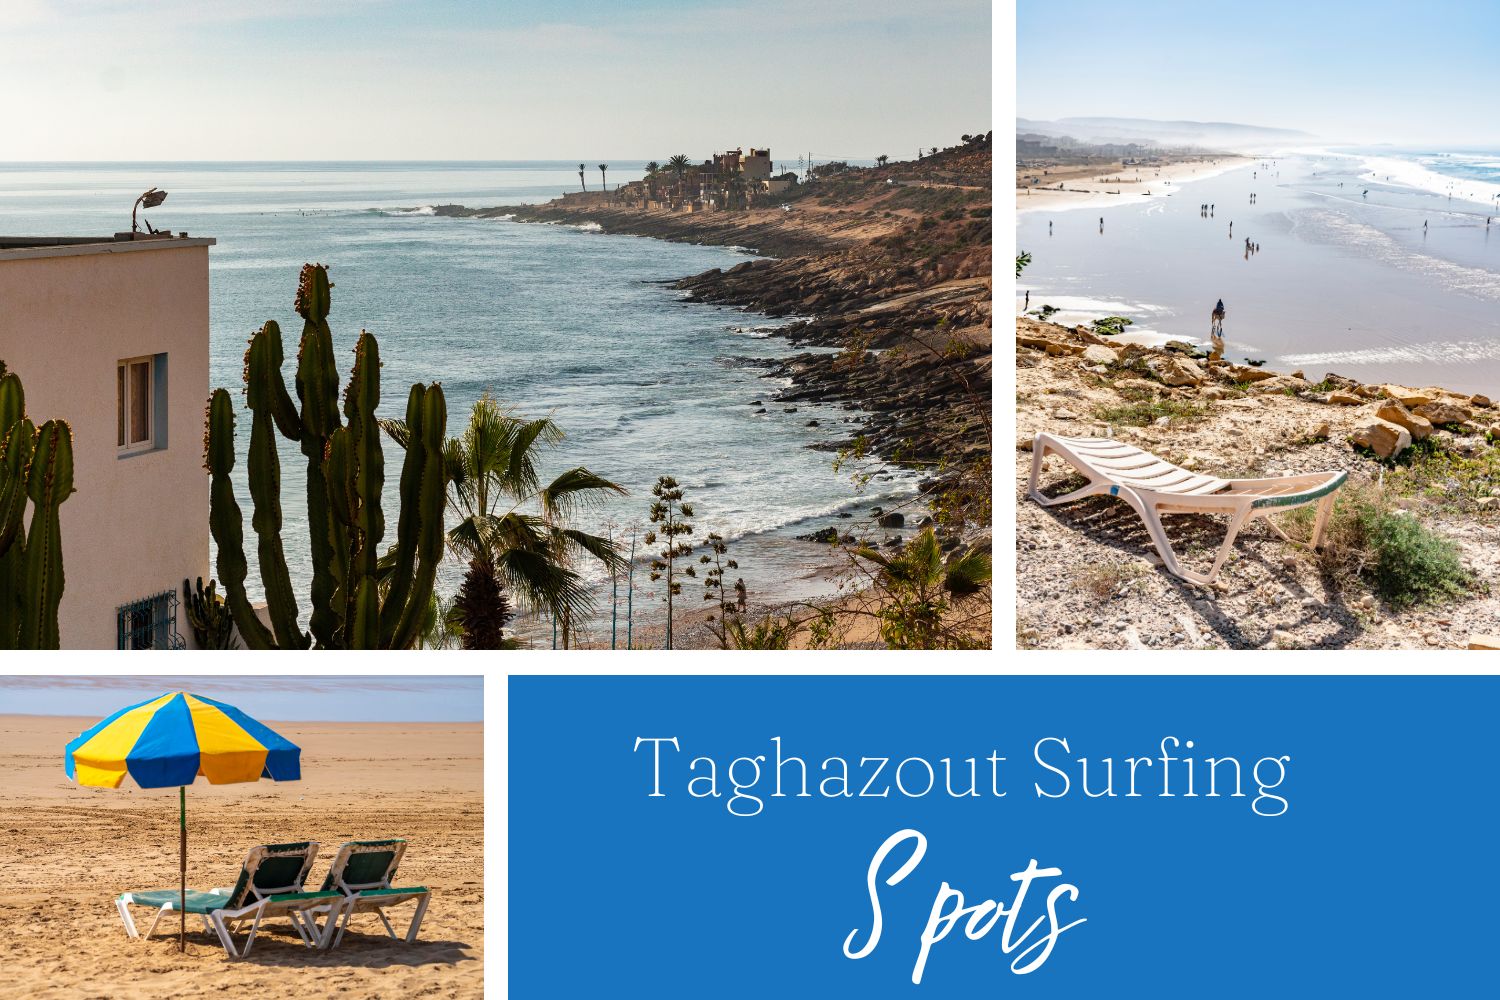 Taghazout Surfing Spots